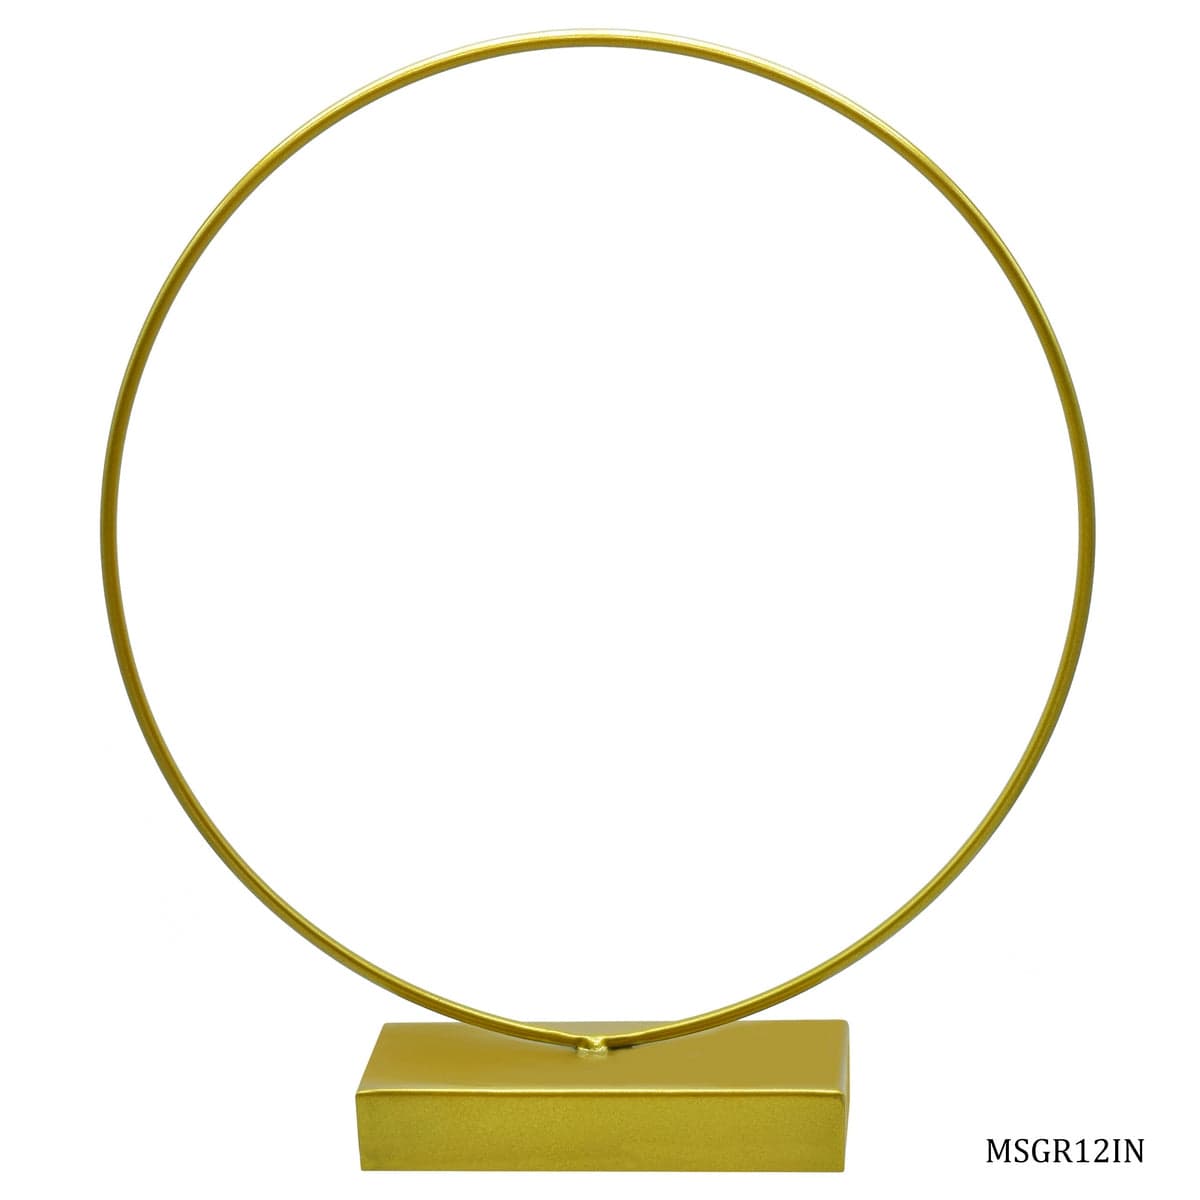 jags-mumbai Easel Luxurious Gold Round Metal Stand - 12 Inch Diameter, Contain 1 Unit